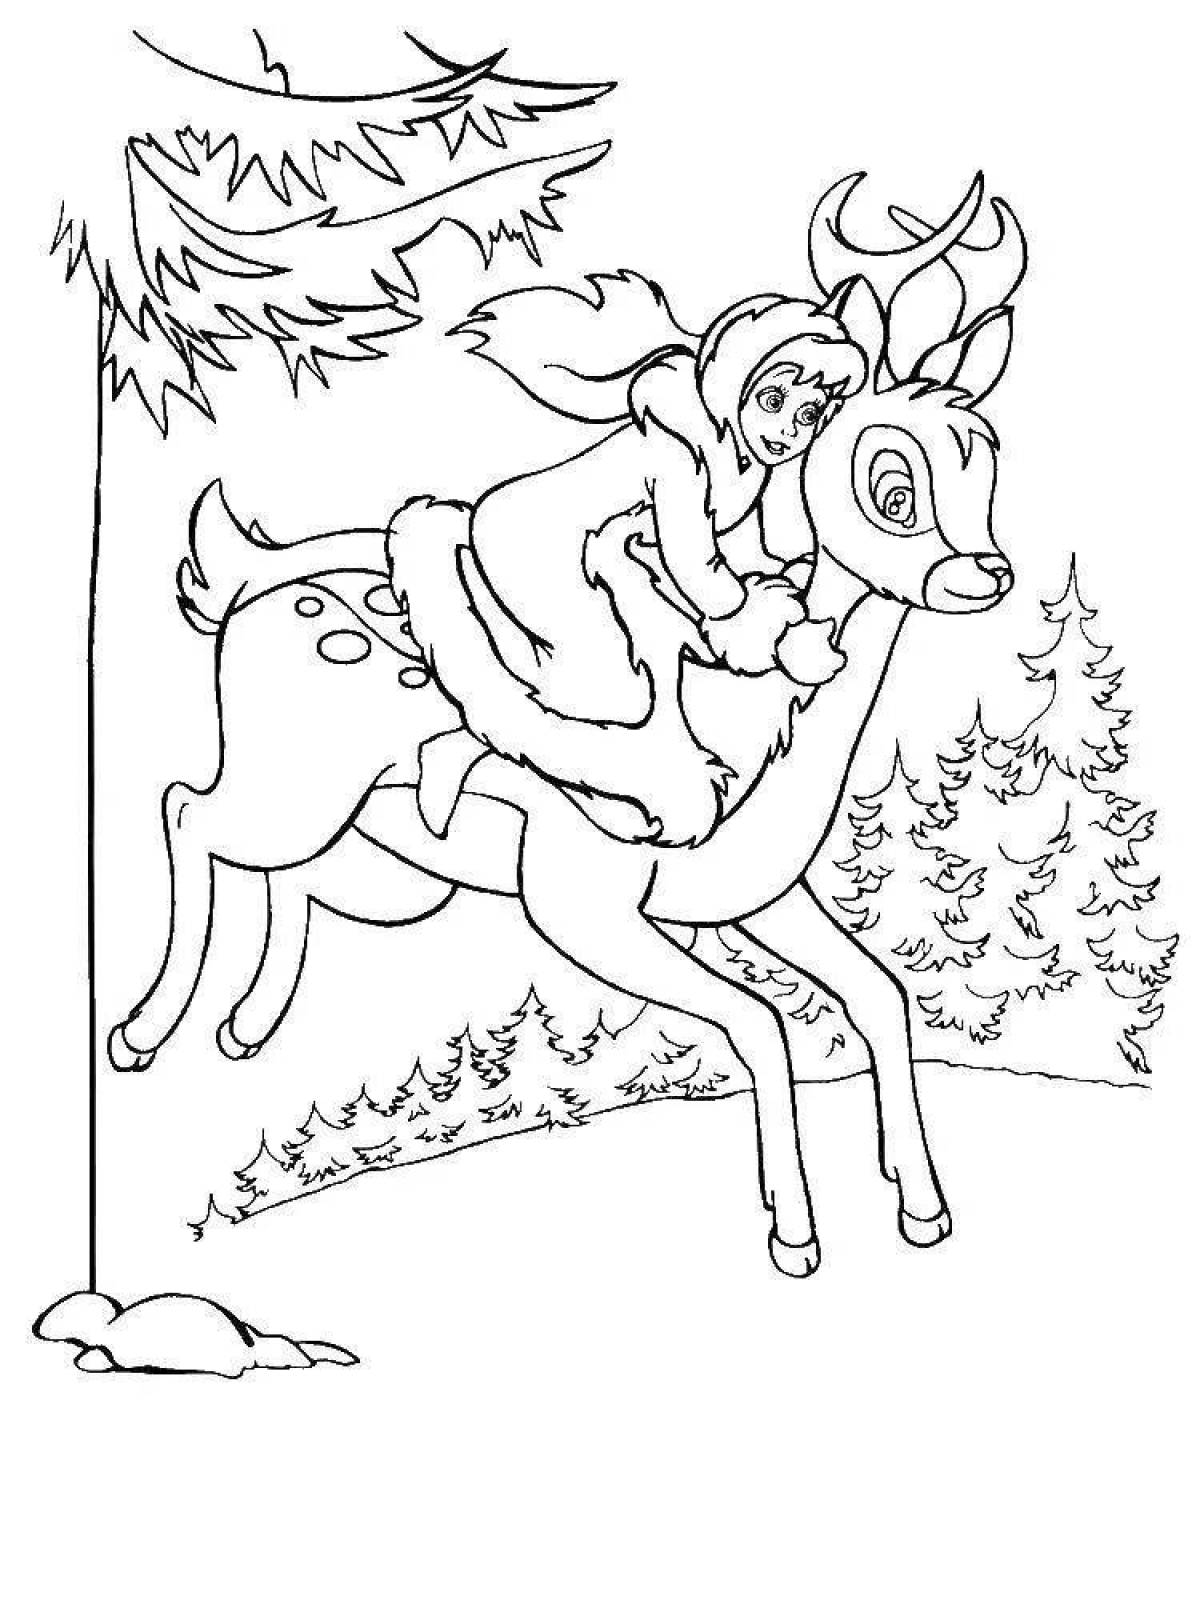 Gerd's colorful coloring page